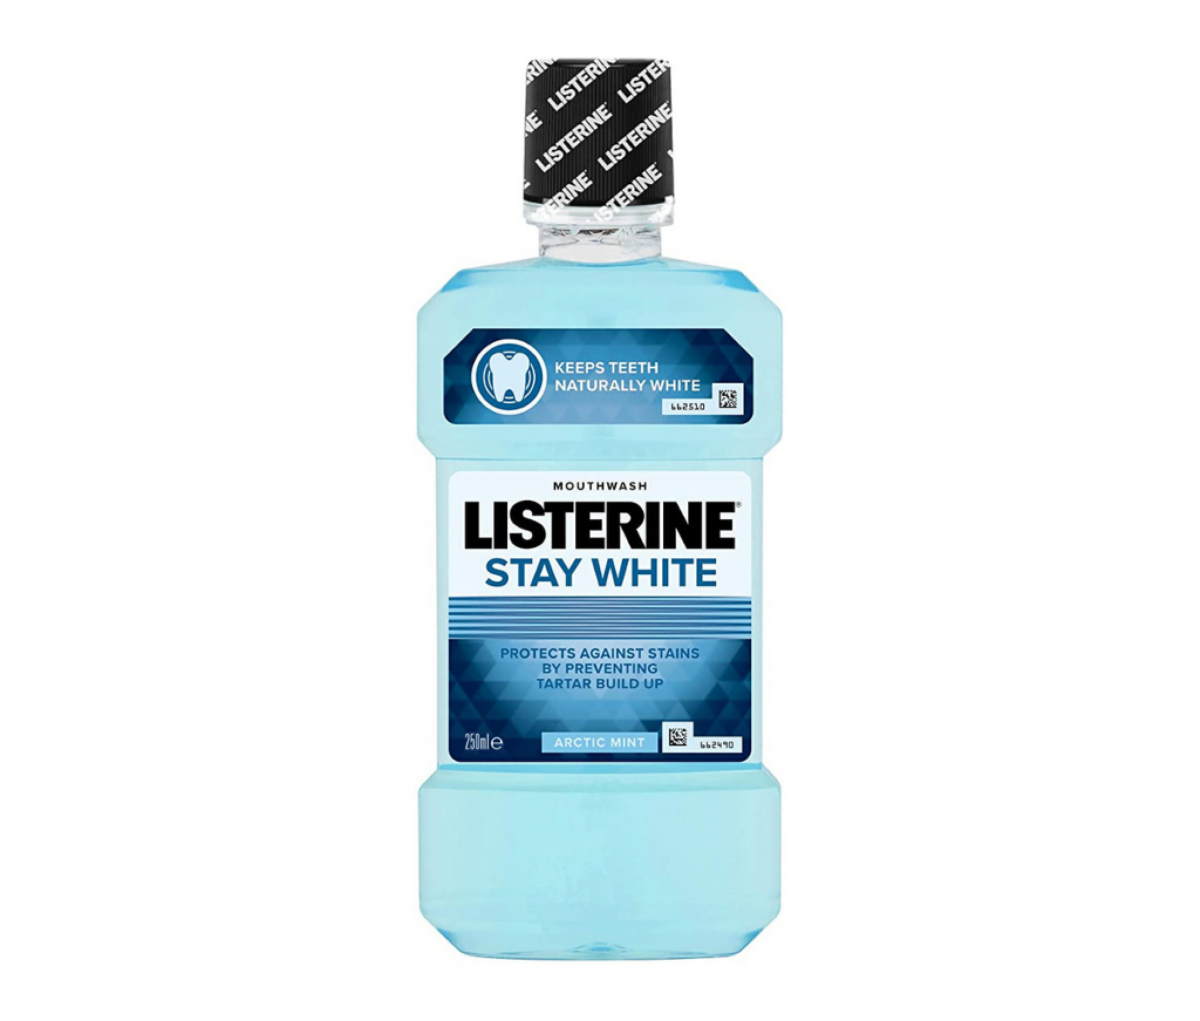 Listerine 250ml Stay White Mouth Wash